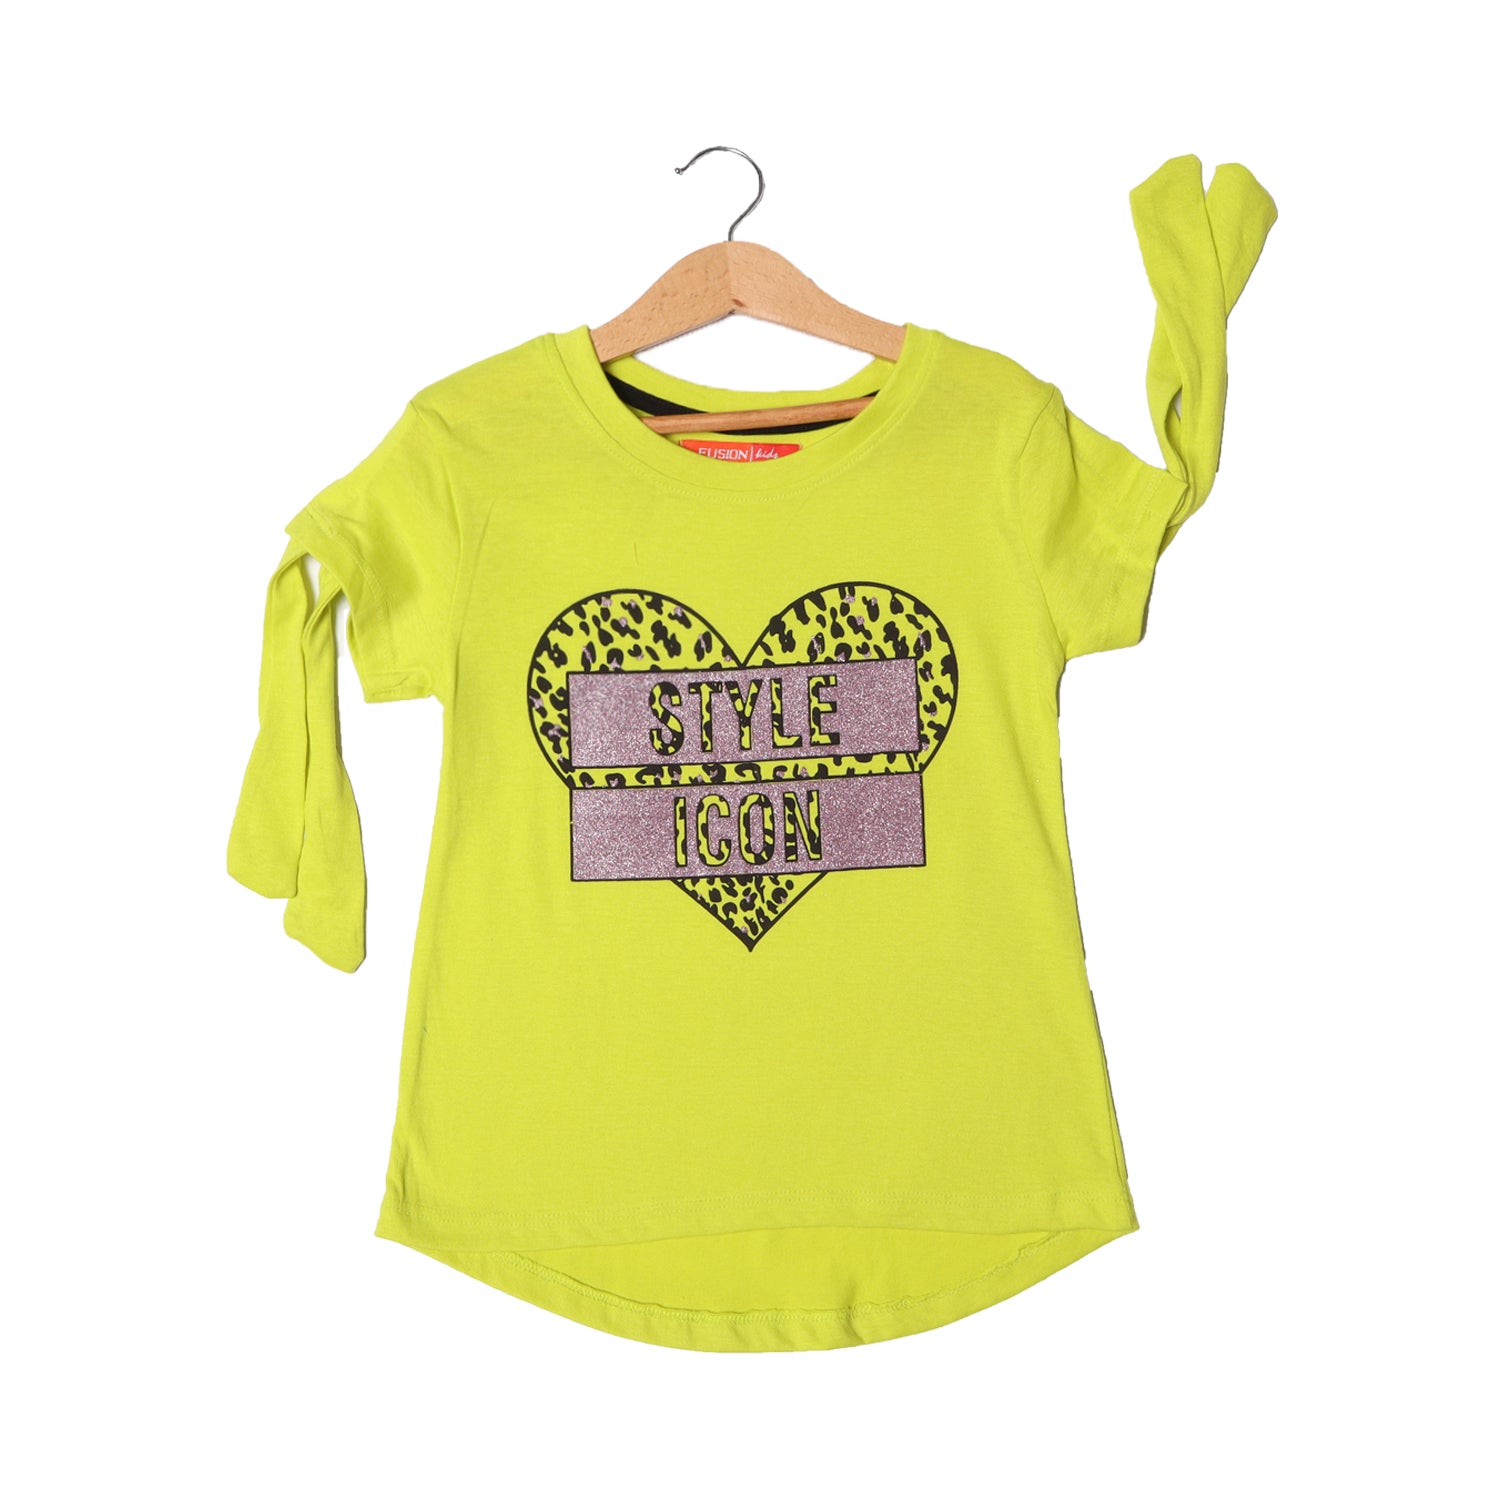 LIGHT GREEN HEART STYLE ICON PRINTED T-SHIRT FOR GIRLS